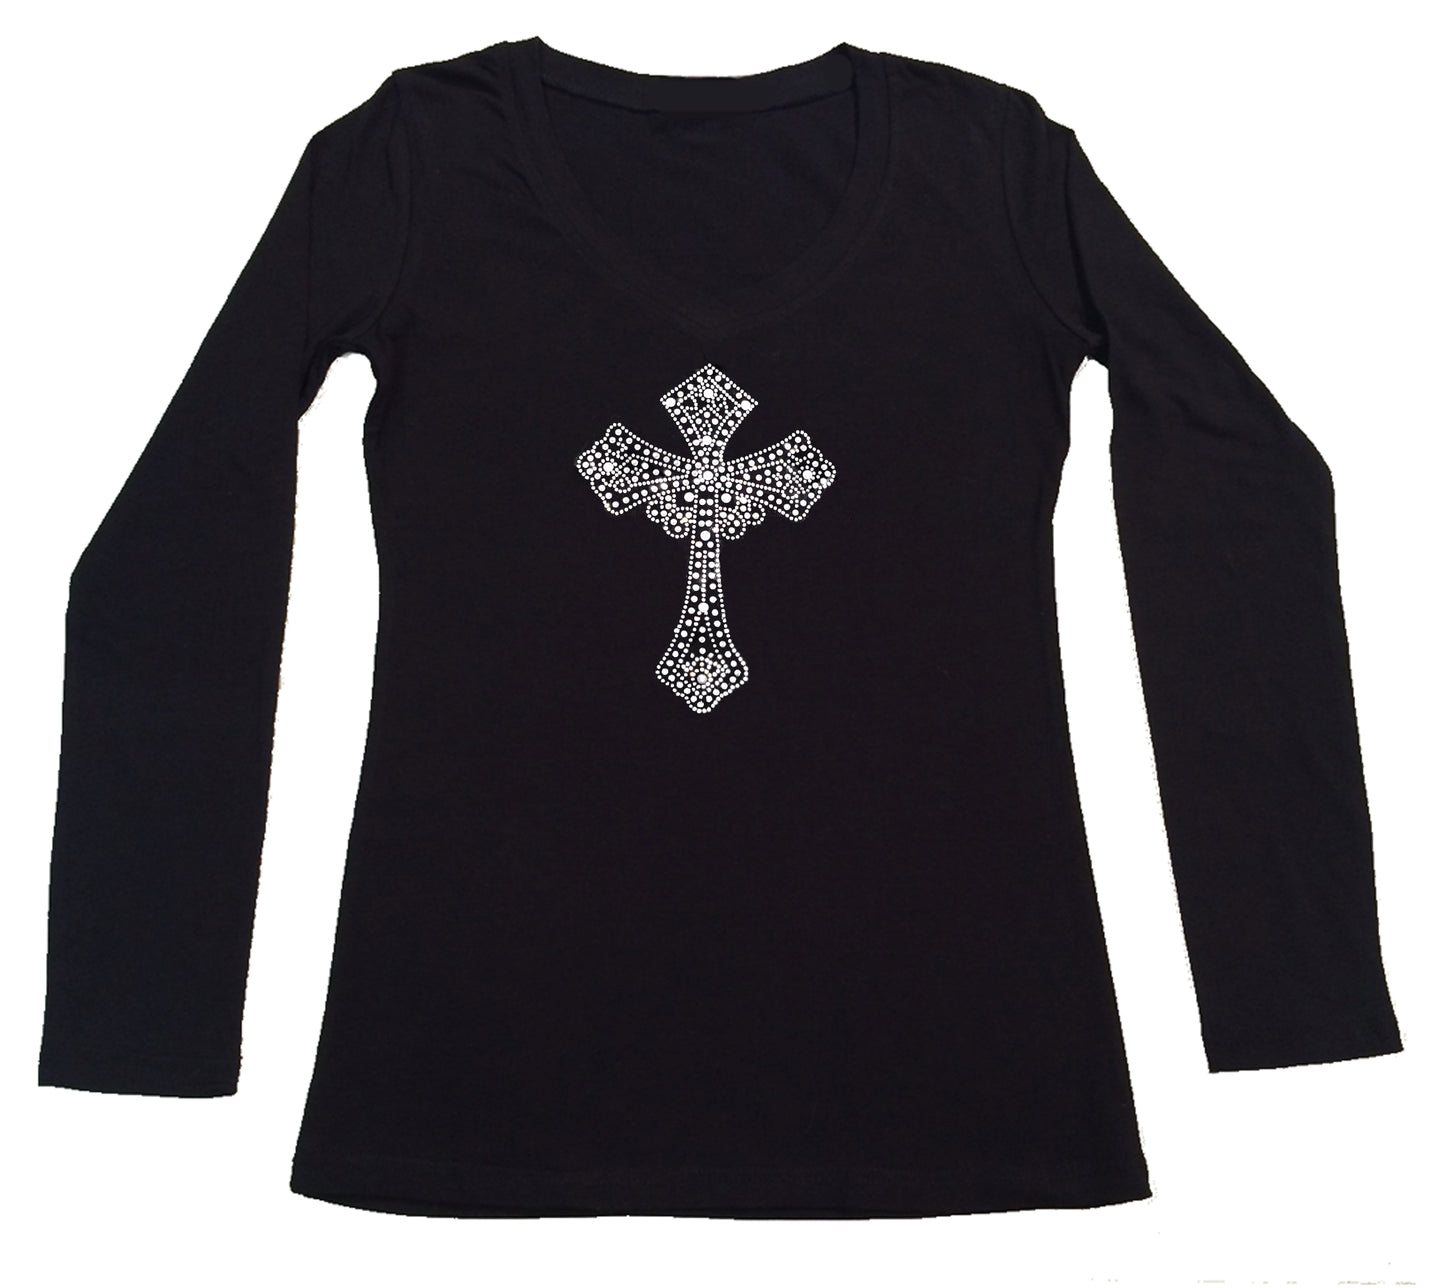 Womens T-shirt with Crystal Cross in Rhinestones